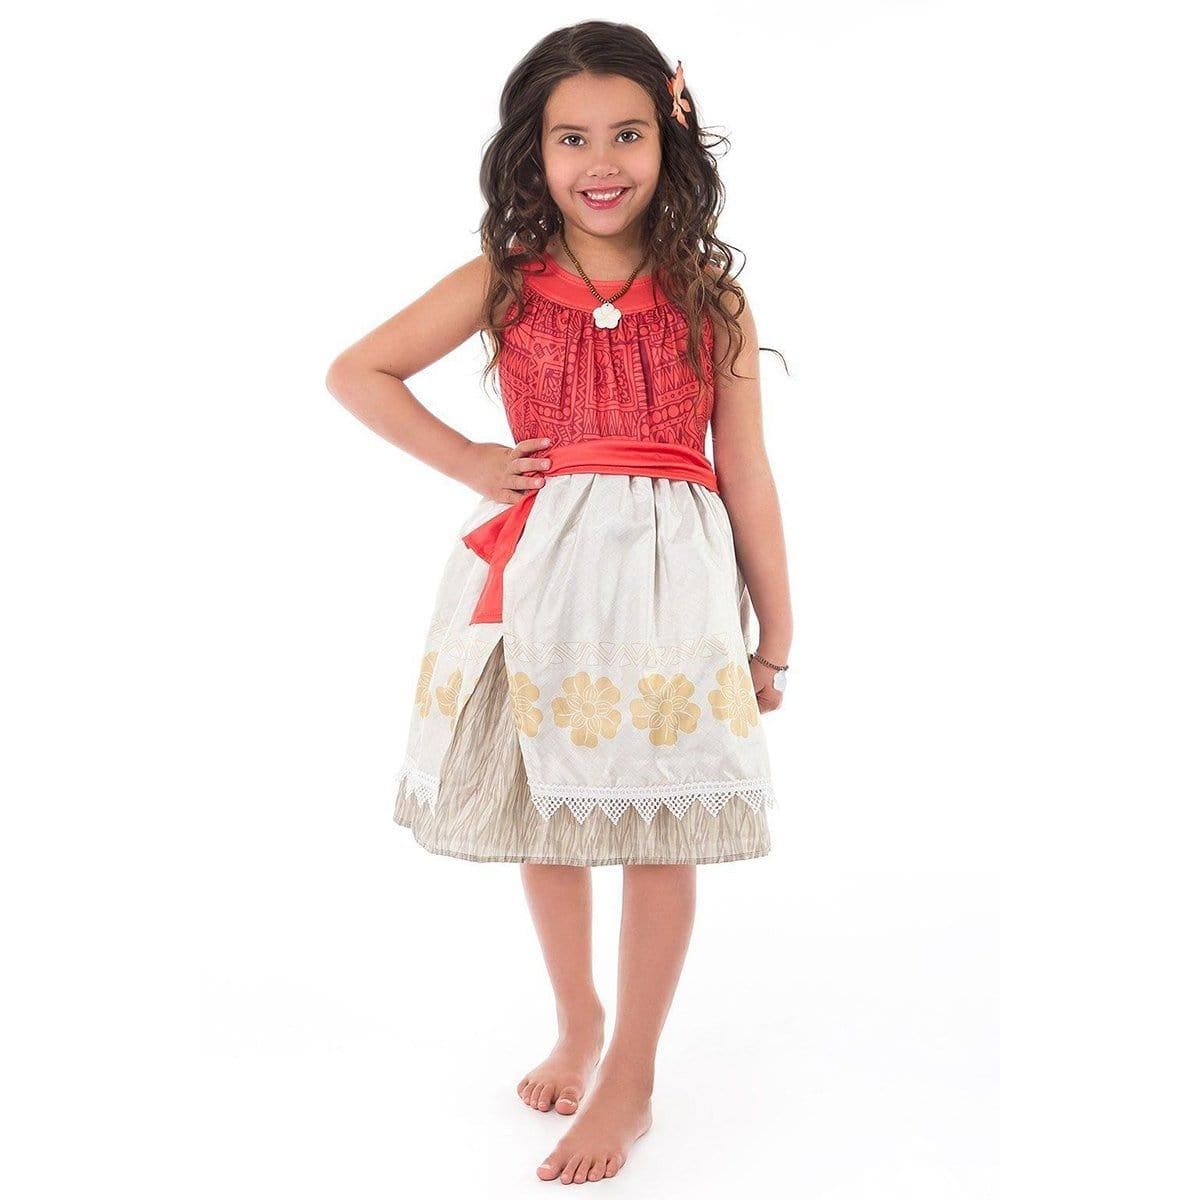 Buy Costumes Polynesian Princess Costume for Kids sold at Party Expert